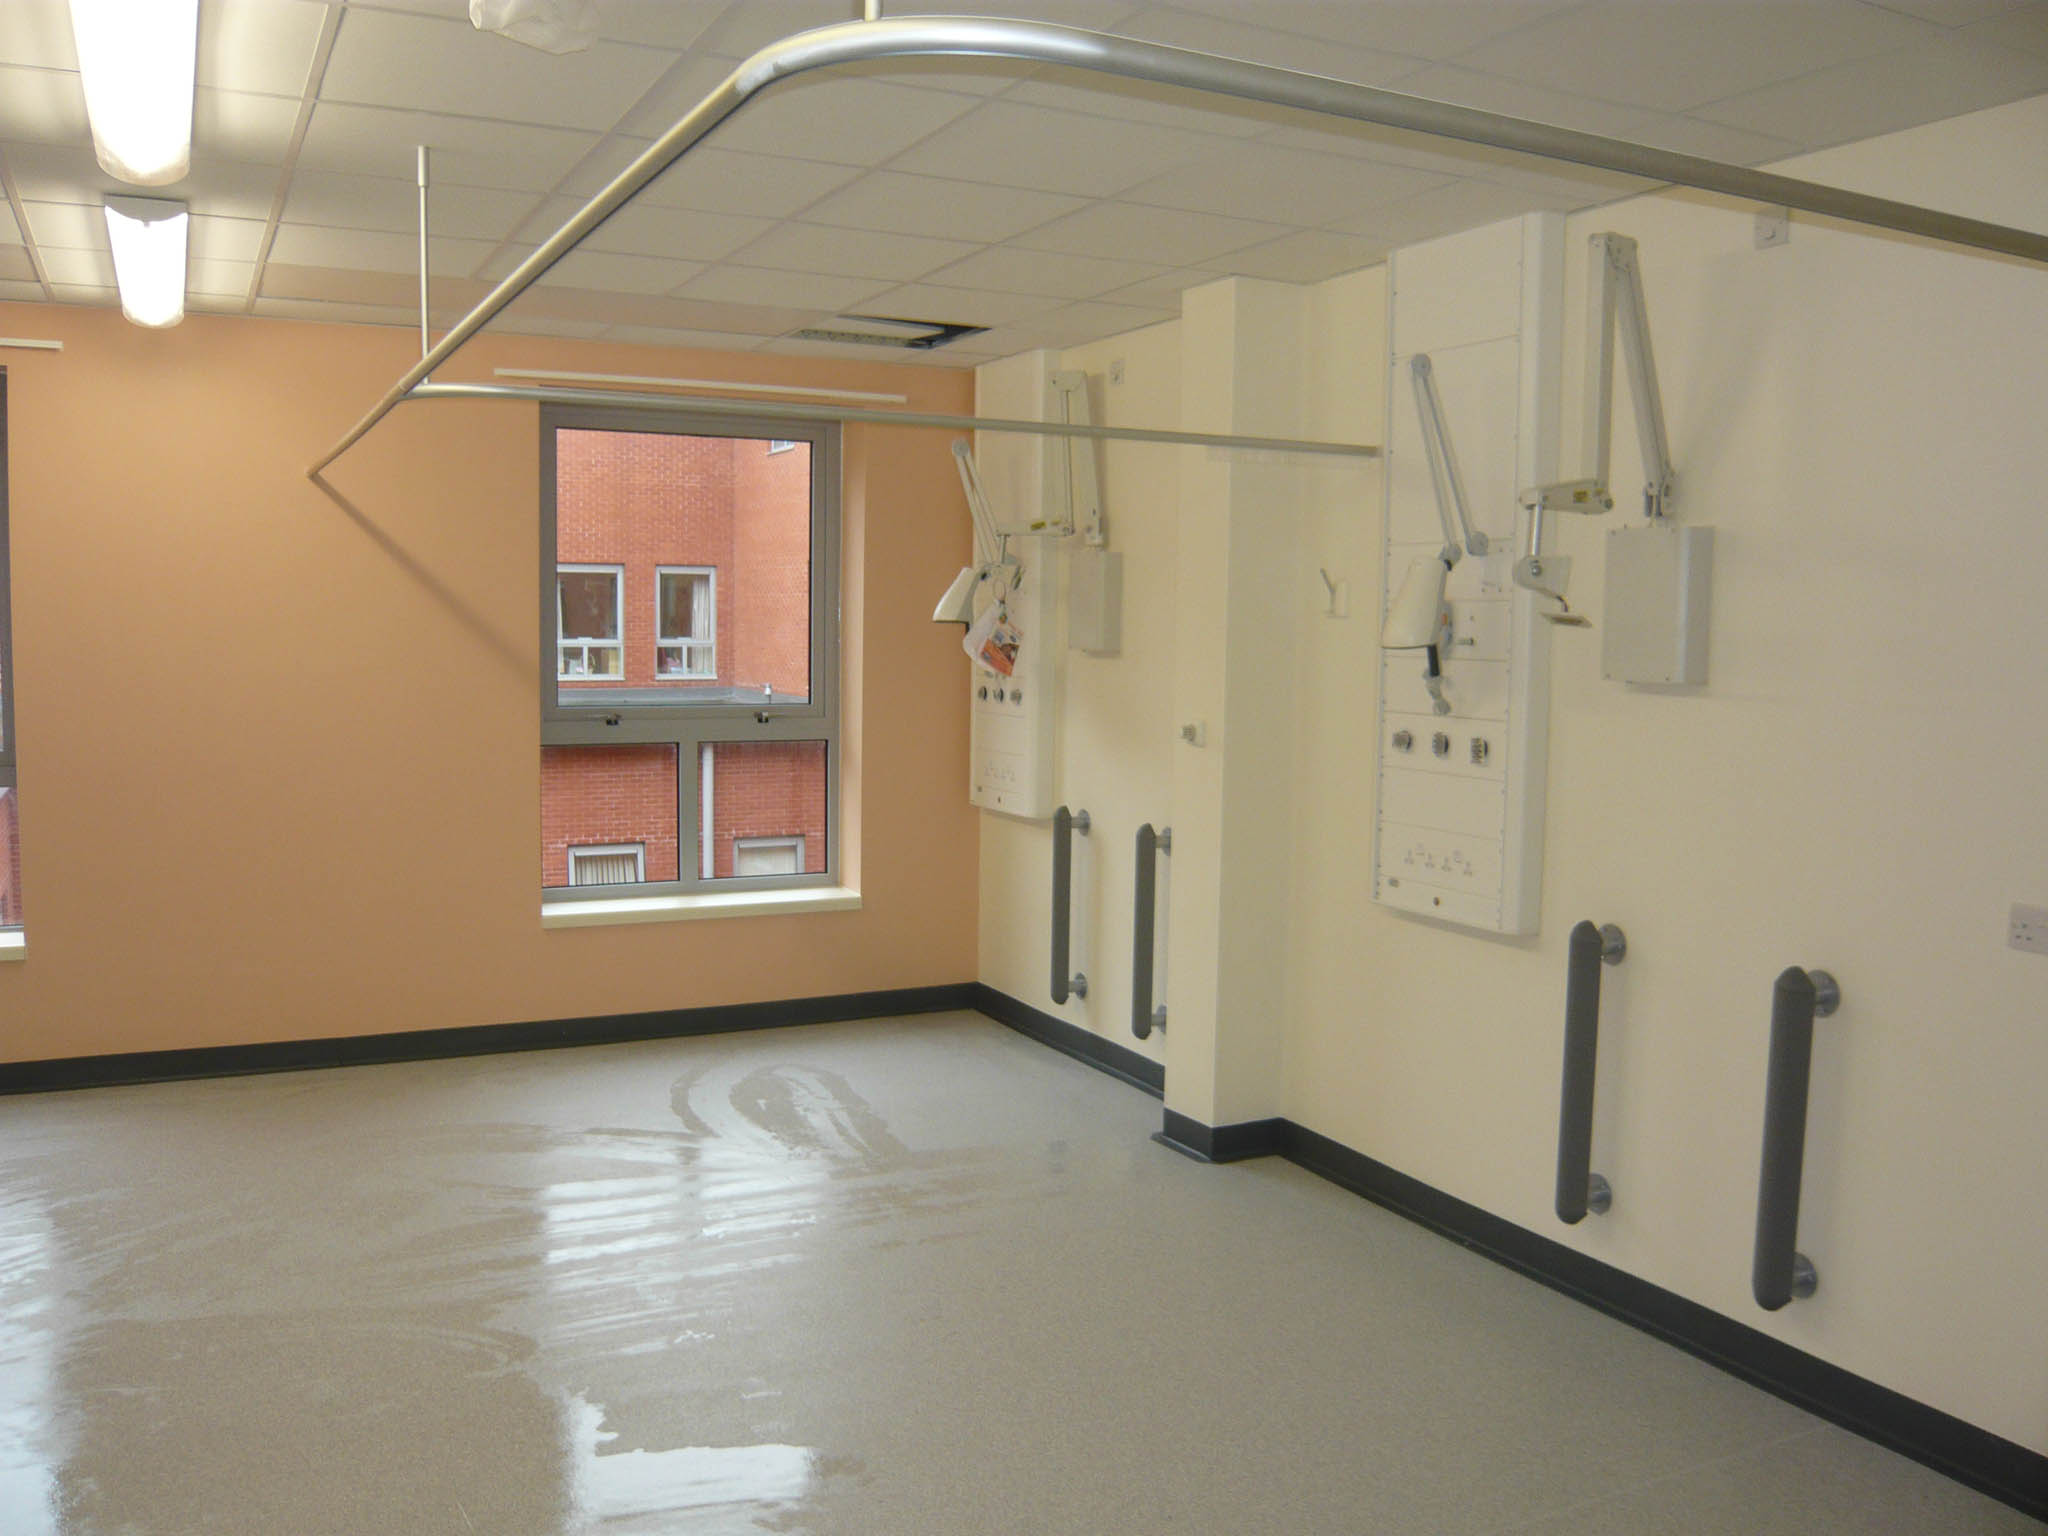 Our Projects - Hereford County Hospital